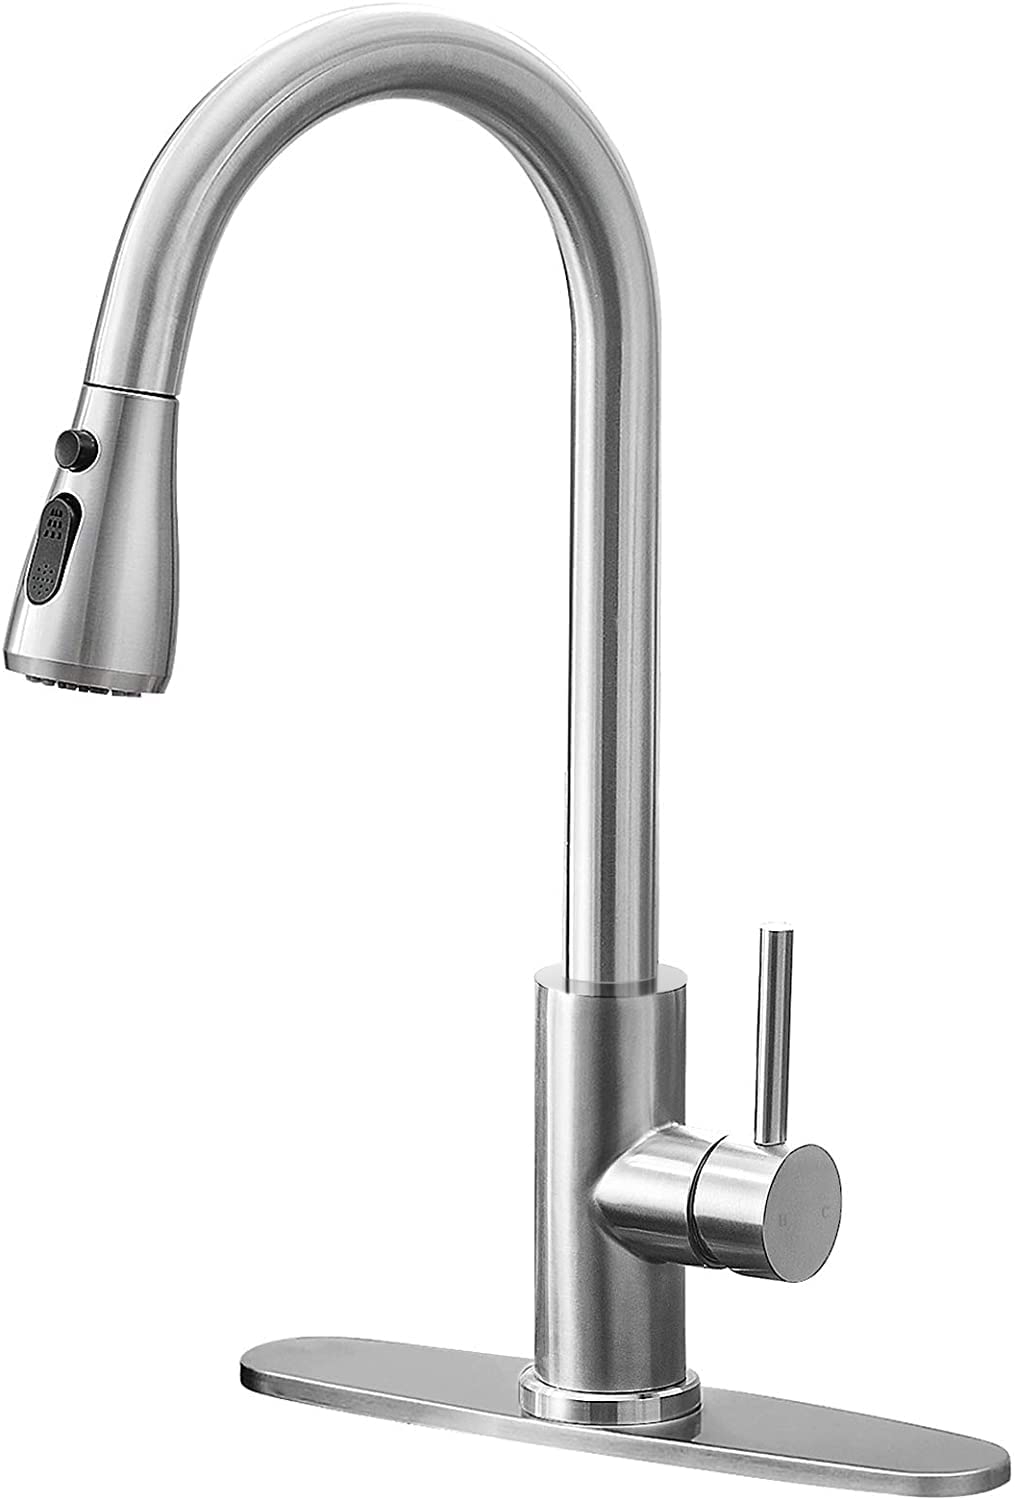 faucet product review